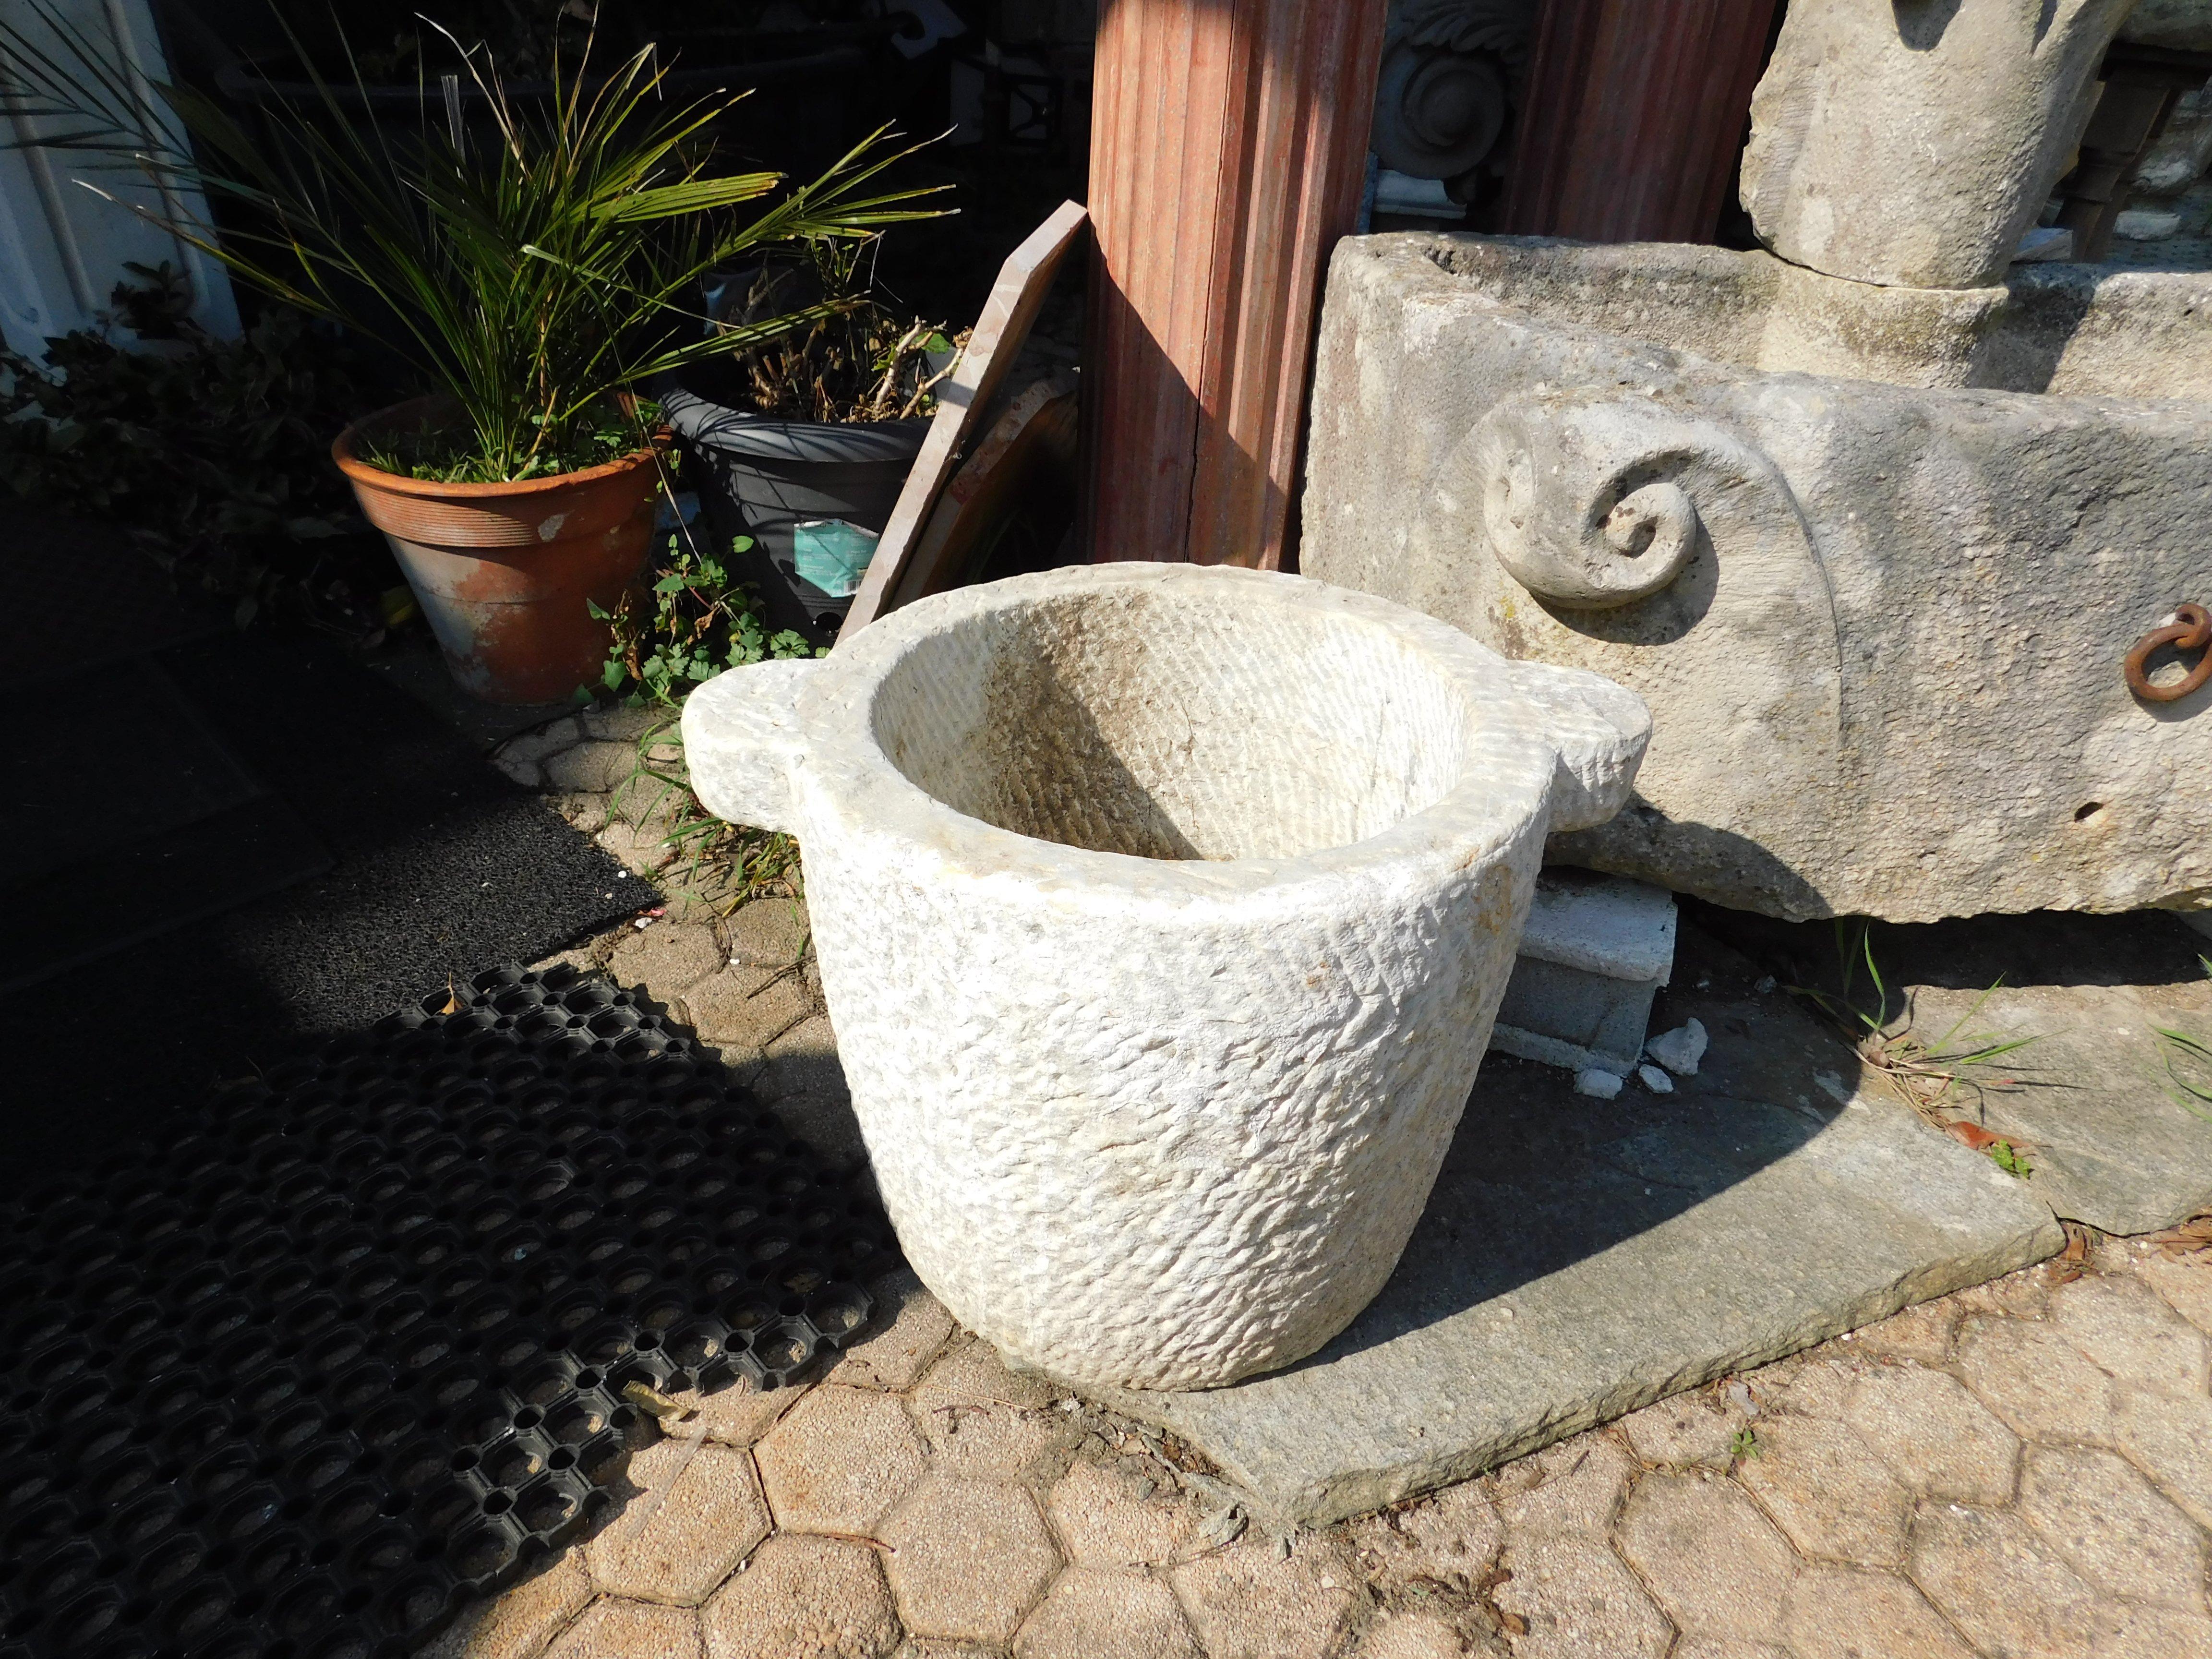 old Vase, mortar-type sink in carved stone, without pestle but probably born as a mortar, has two side handles and no drain hole, but can easily be adapted to different uses such as rustic sink, garden tub, etc... built in Handmade in Italy,